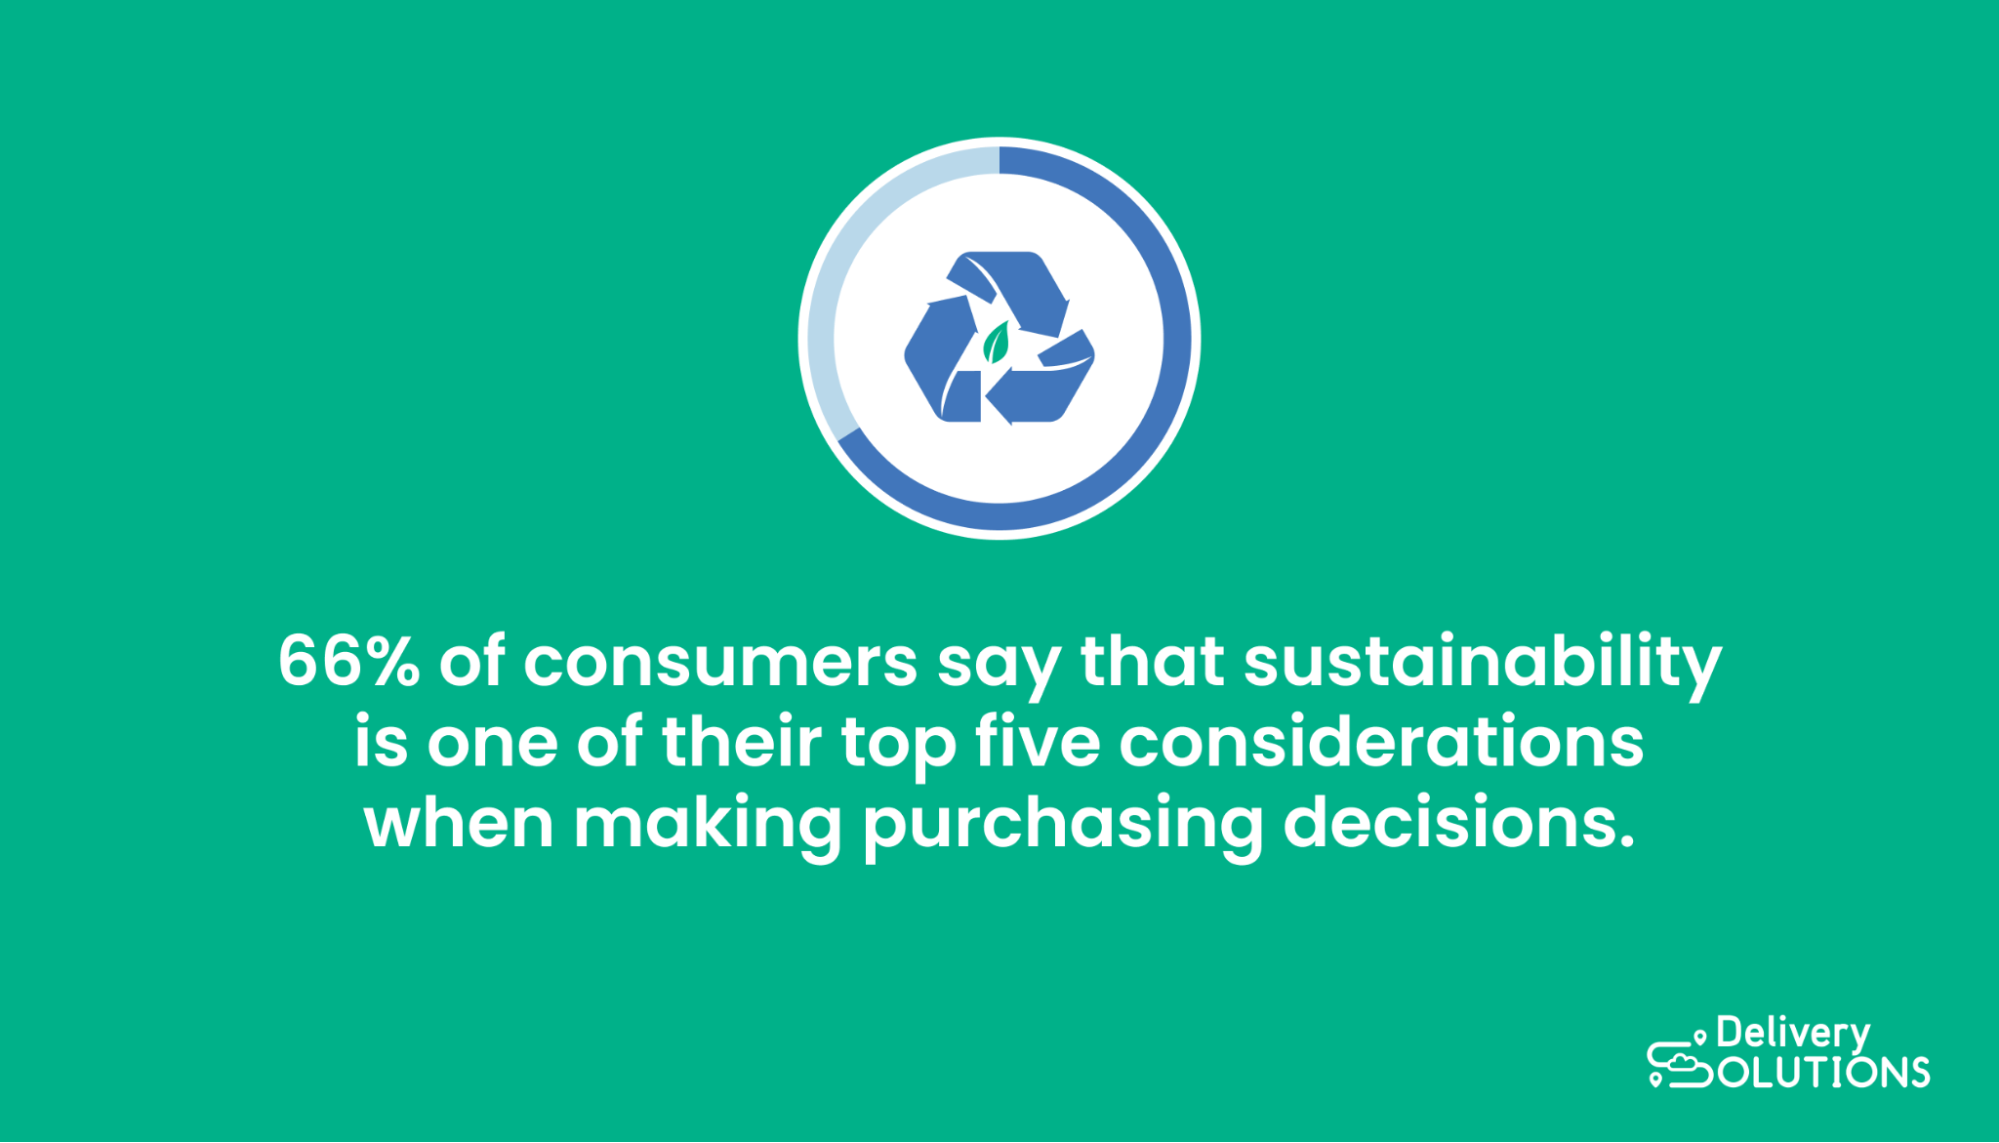 Statistics on sustainability in purchasing decisions